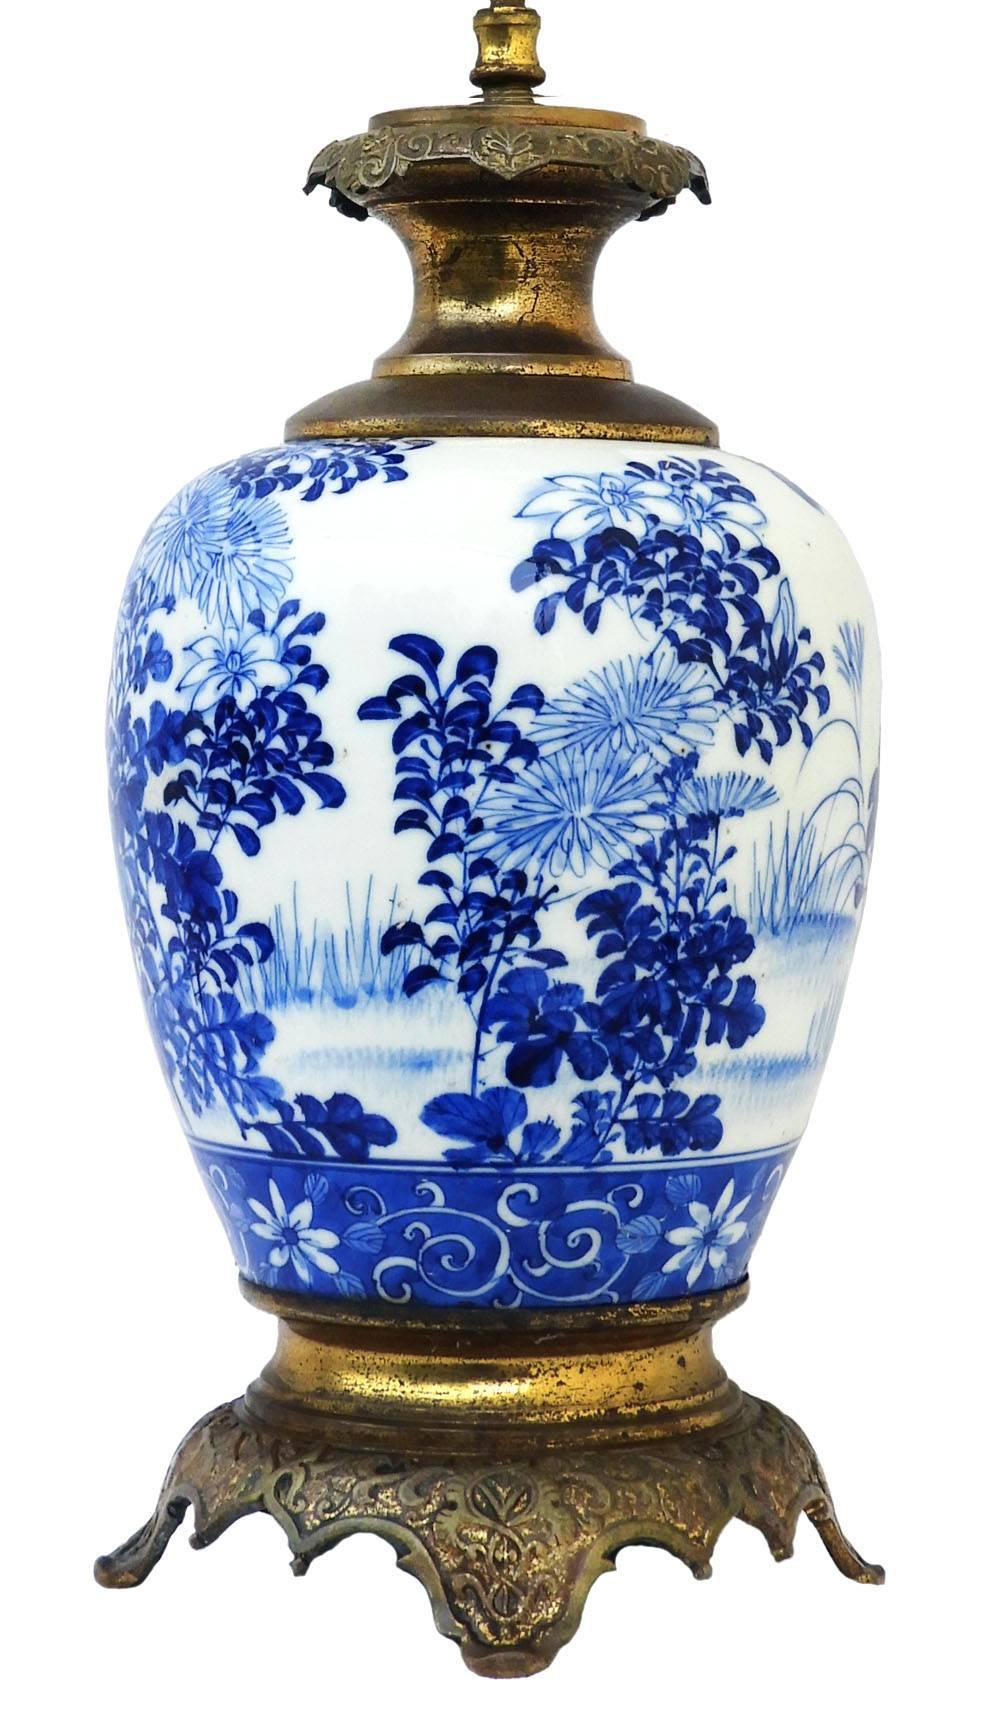 French table lamp blue and white porcelain gilded bronze chinoiserie, circa 1920
Blue and white lamp base Chinese porcelain 
Charming chinoiserie decorated flower garden design on a decorative gilded bronze pedestal base.
In very good original